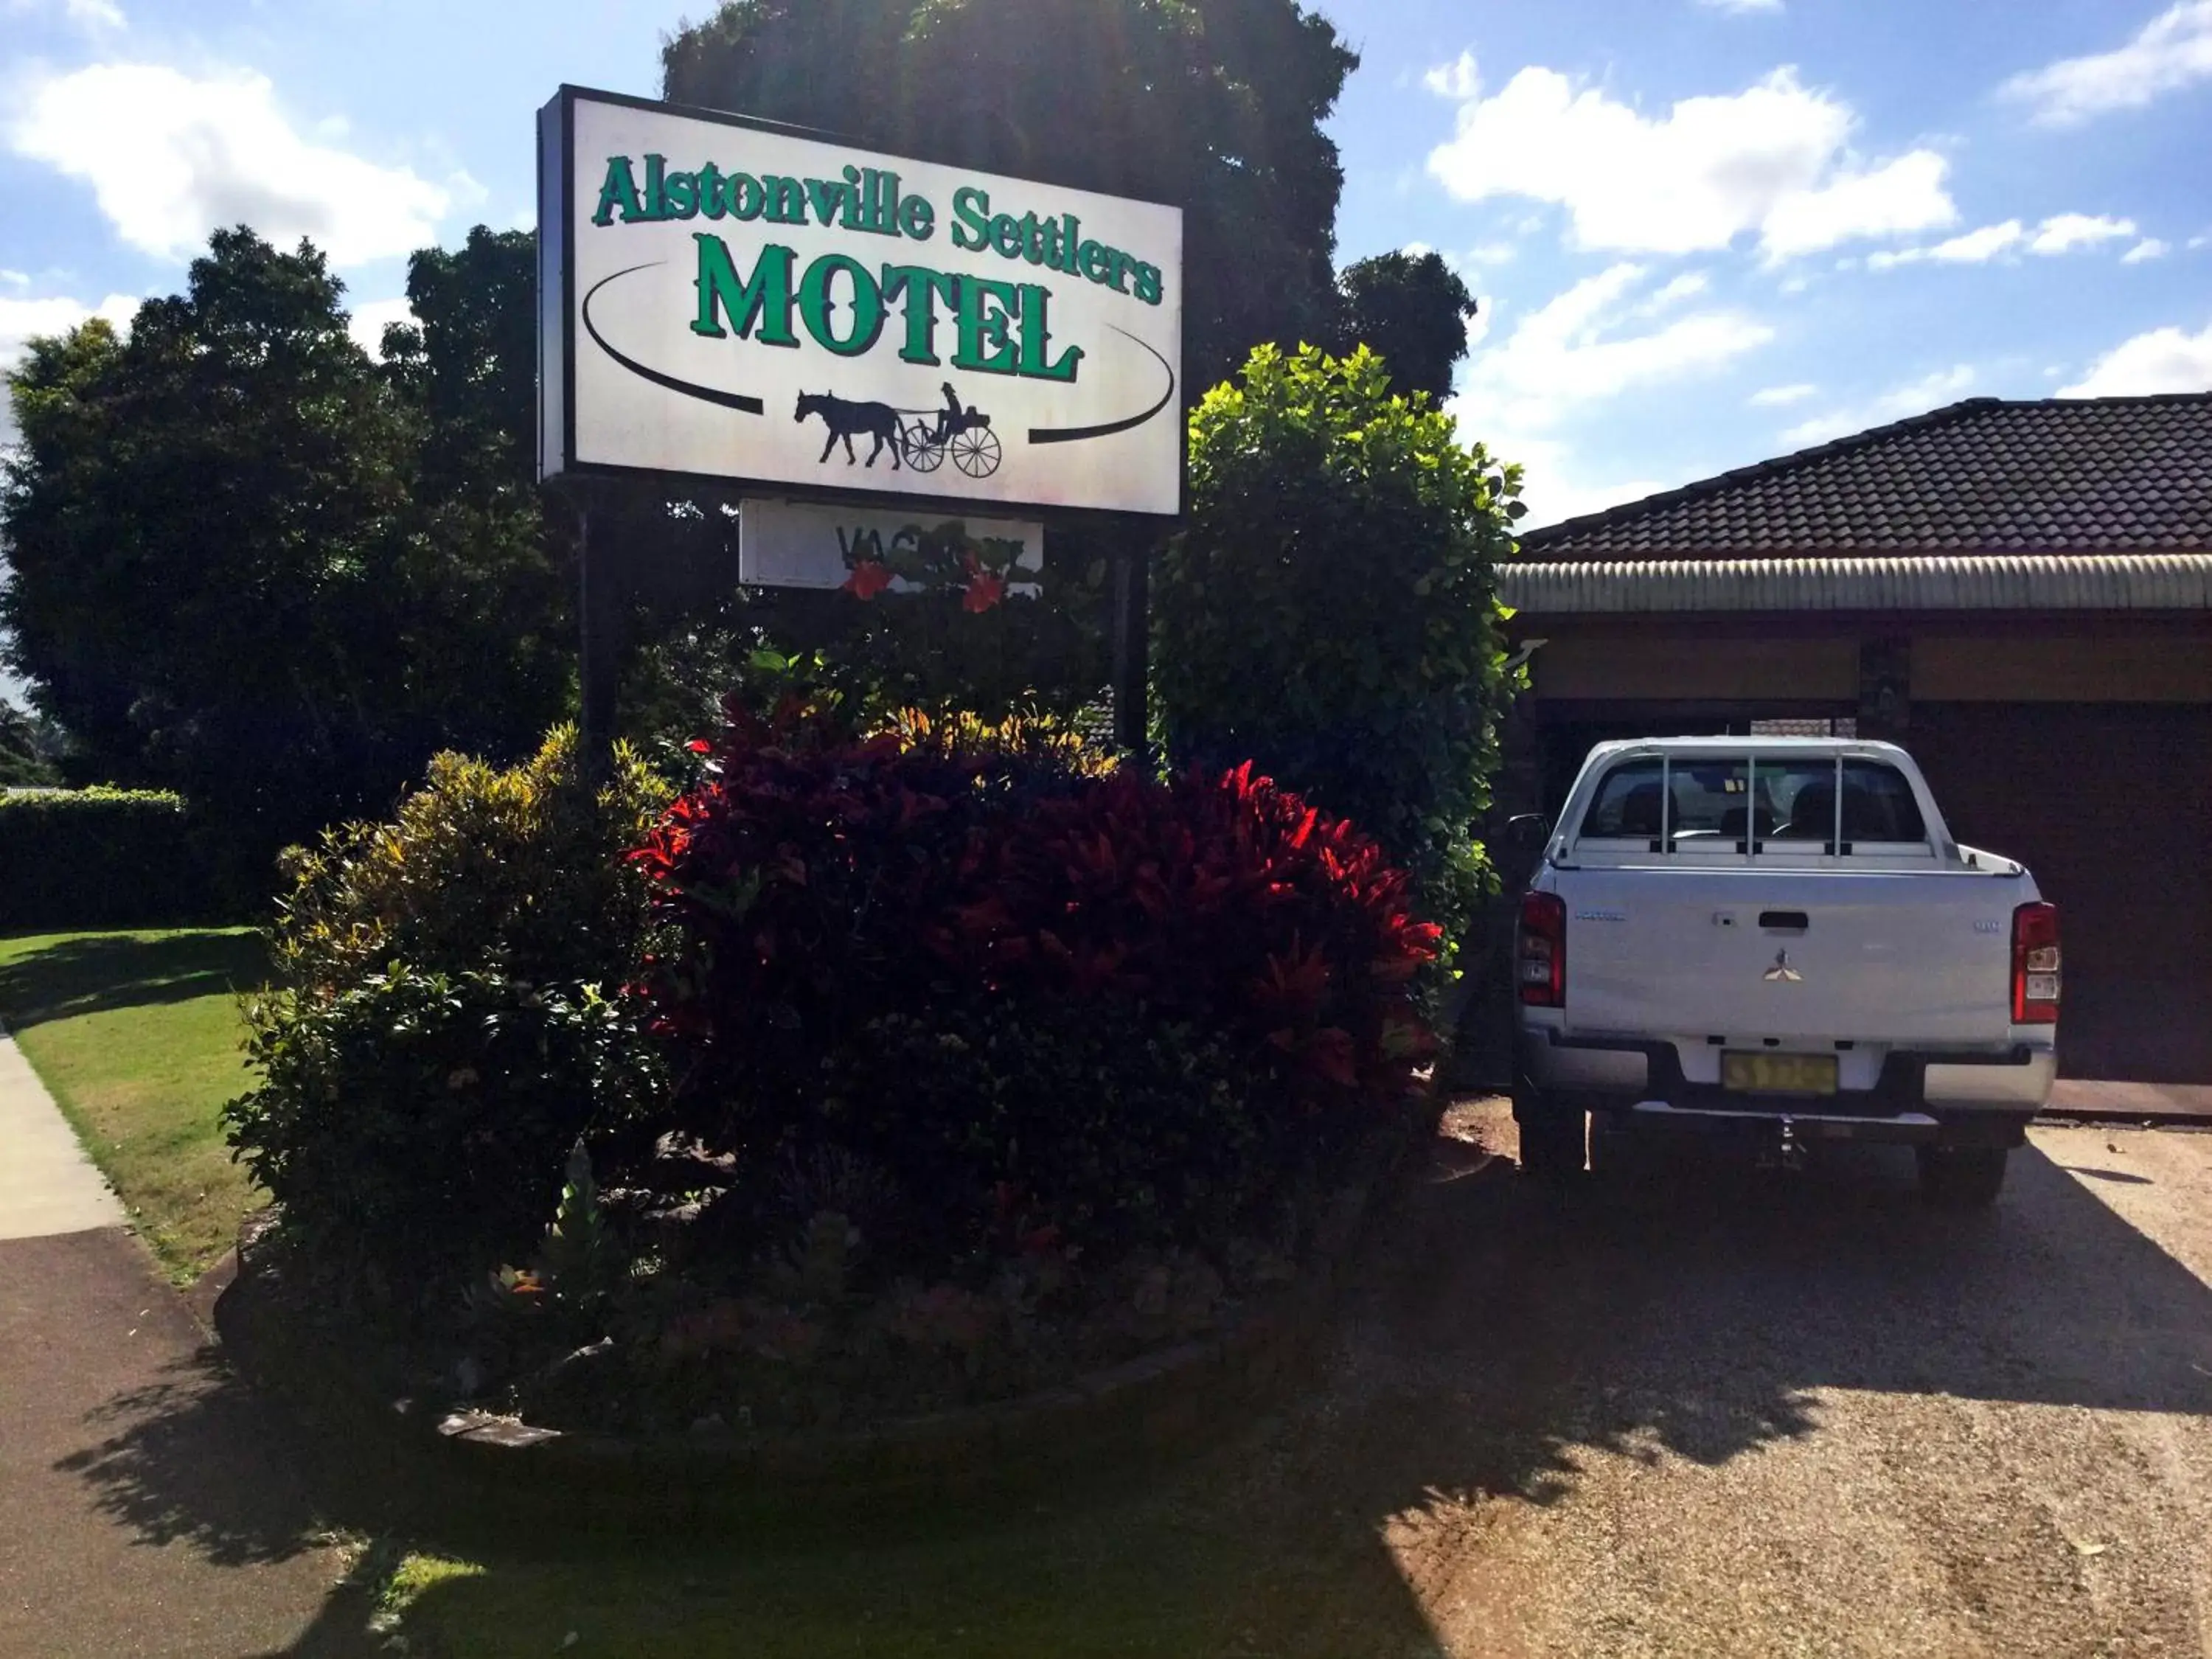 Property logo or sign, Property Building in Alstonville Settlers Motel